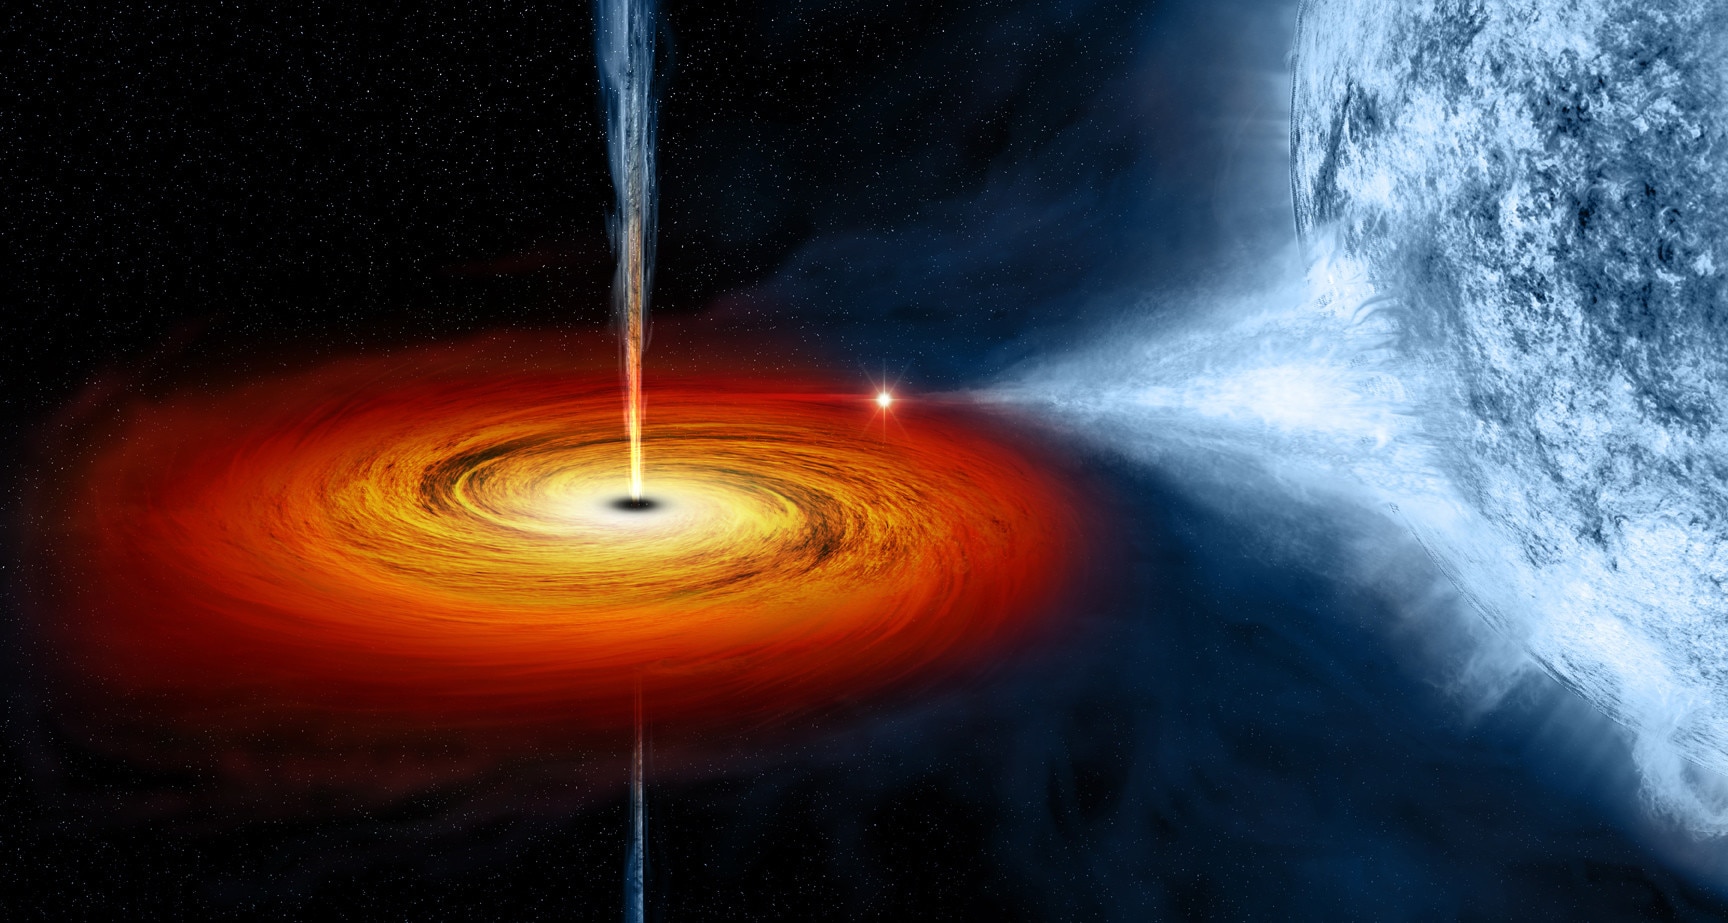 Artwork depicting a black hole drawing material off its massive blue stellar companion. Credit: NASA/CXC/M.Weiss